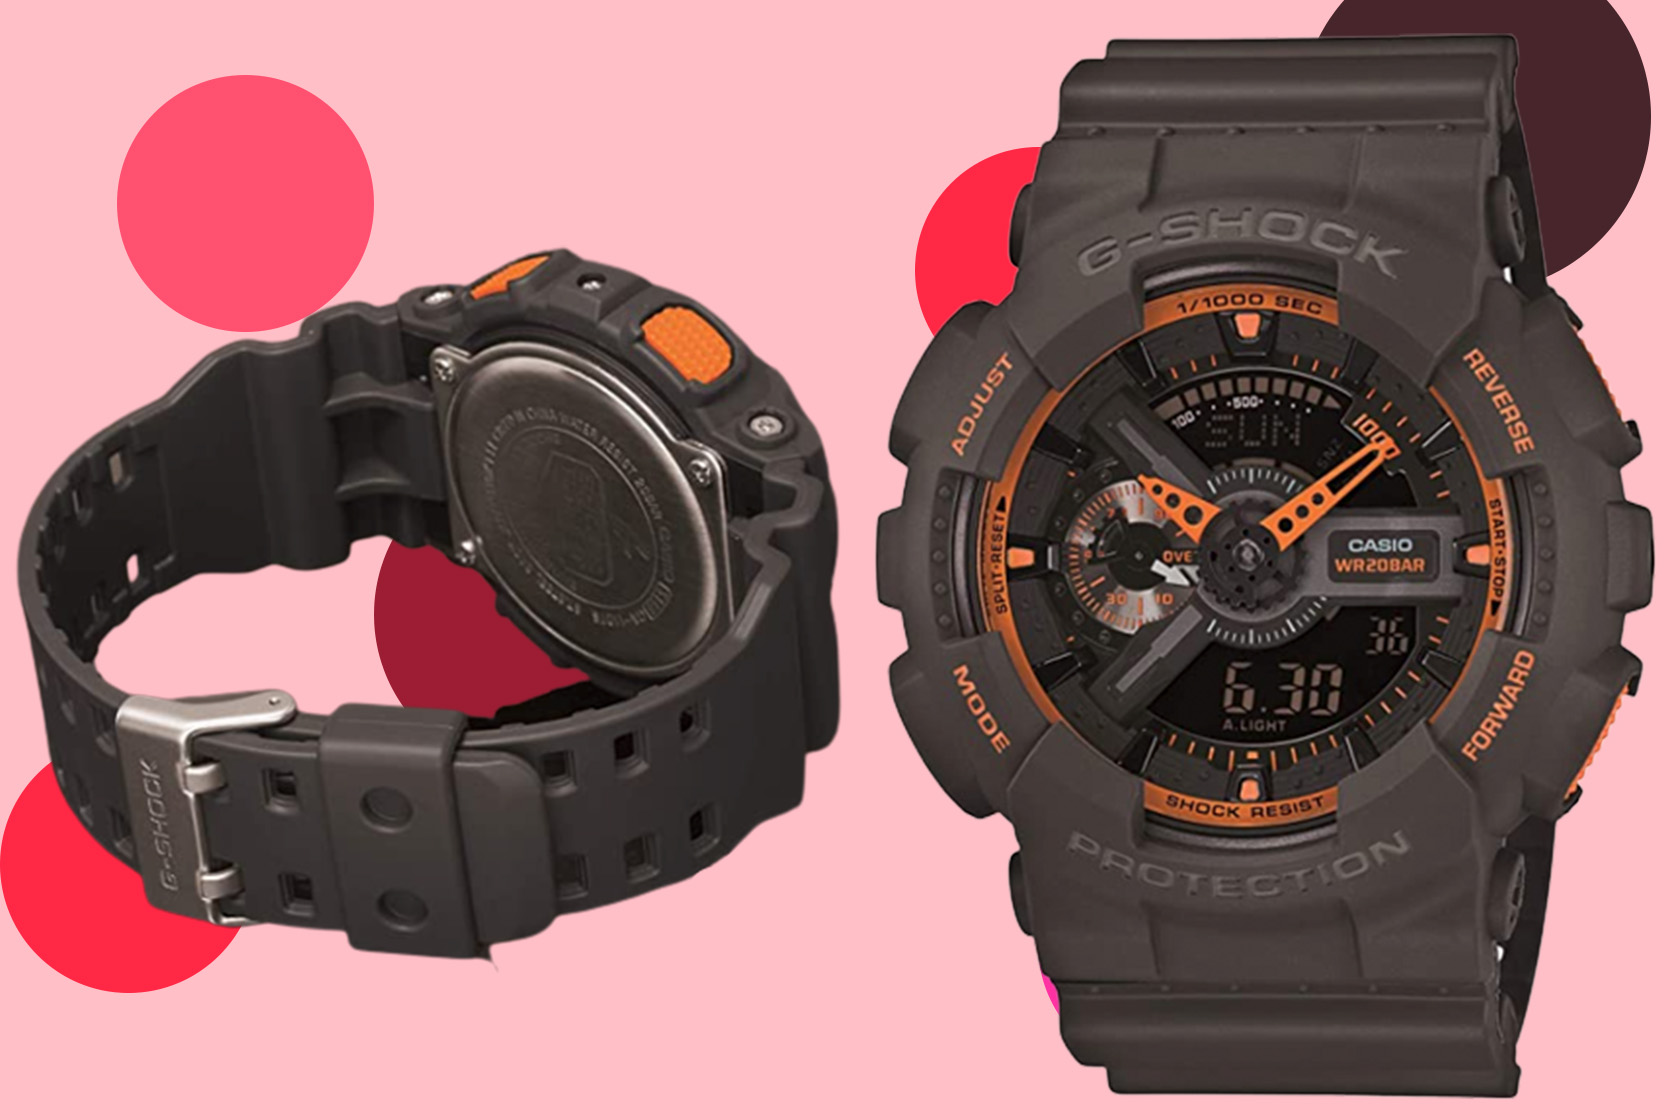 This discounted Casio G-Shock Watch is ready for the most rugged of adventures